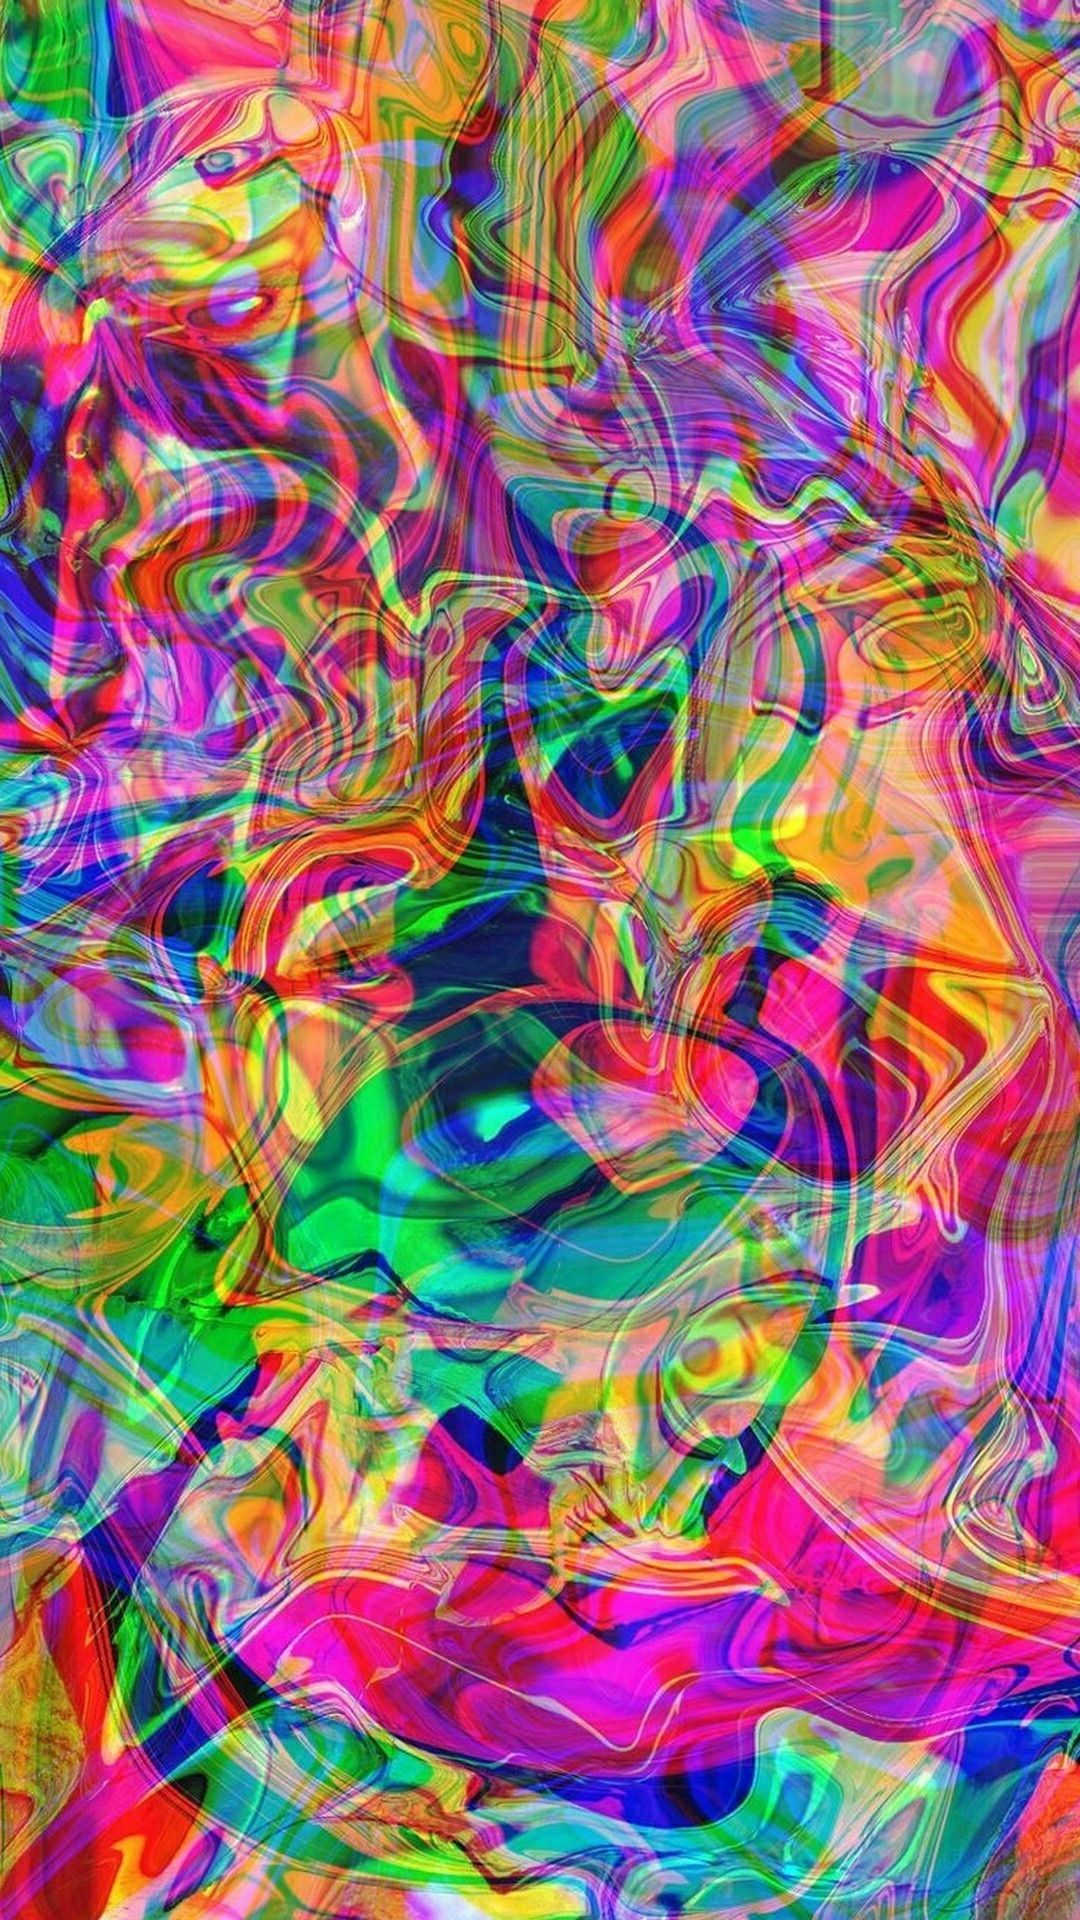 A colorful abstract background image - Psychedelic